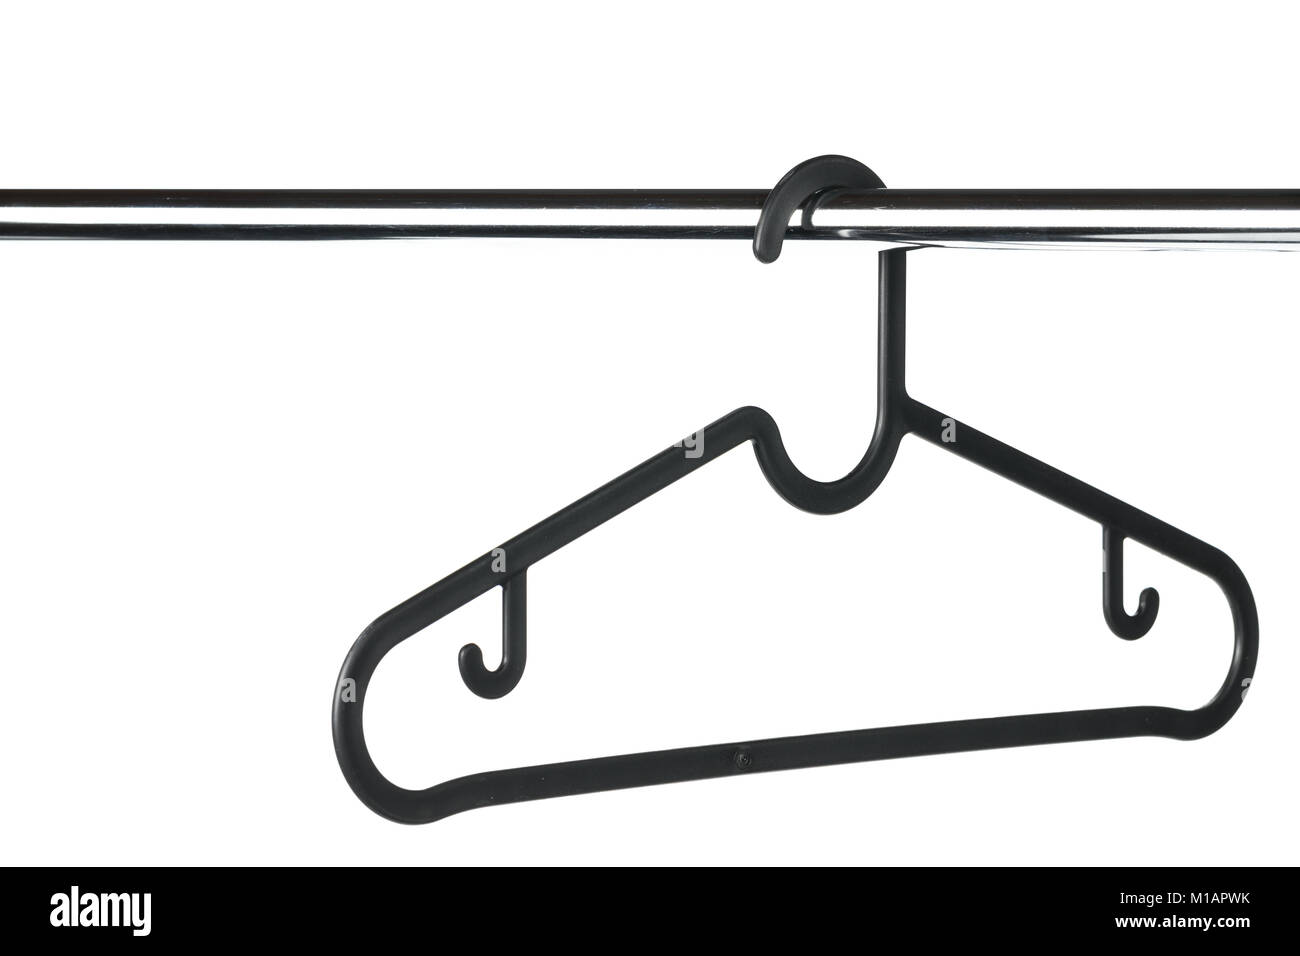 Empty black coat hanger / clothes hanger on a clothes rail with a white background. Potential copy space above and to the left of hanger. Stock Photo